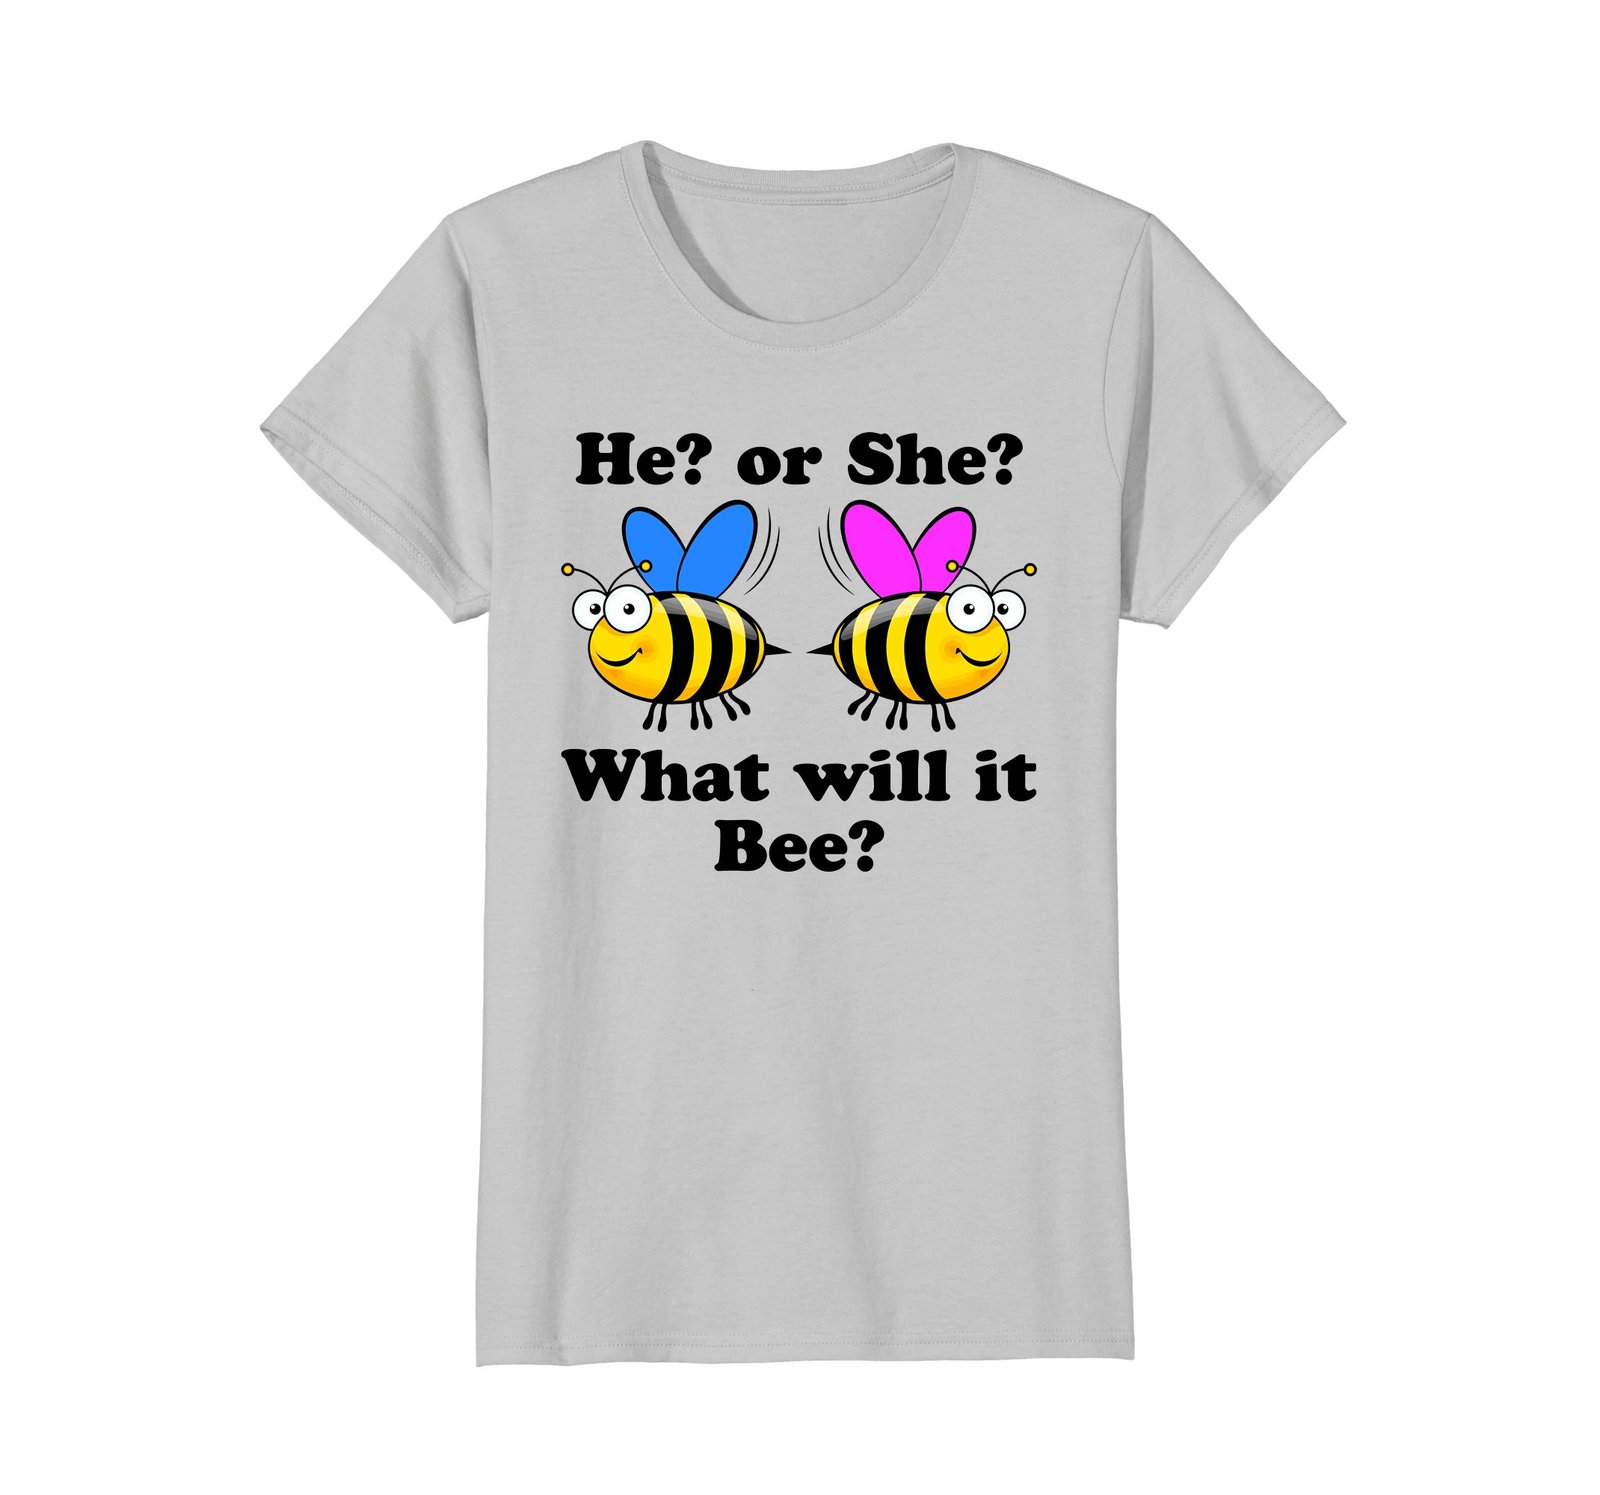 Funny Shirts - He Or She What Will It Bee - Gender Reveal T- Shirt ...